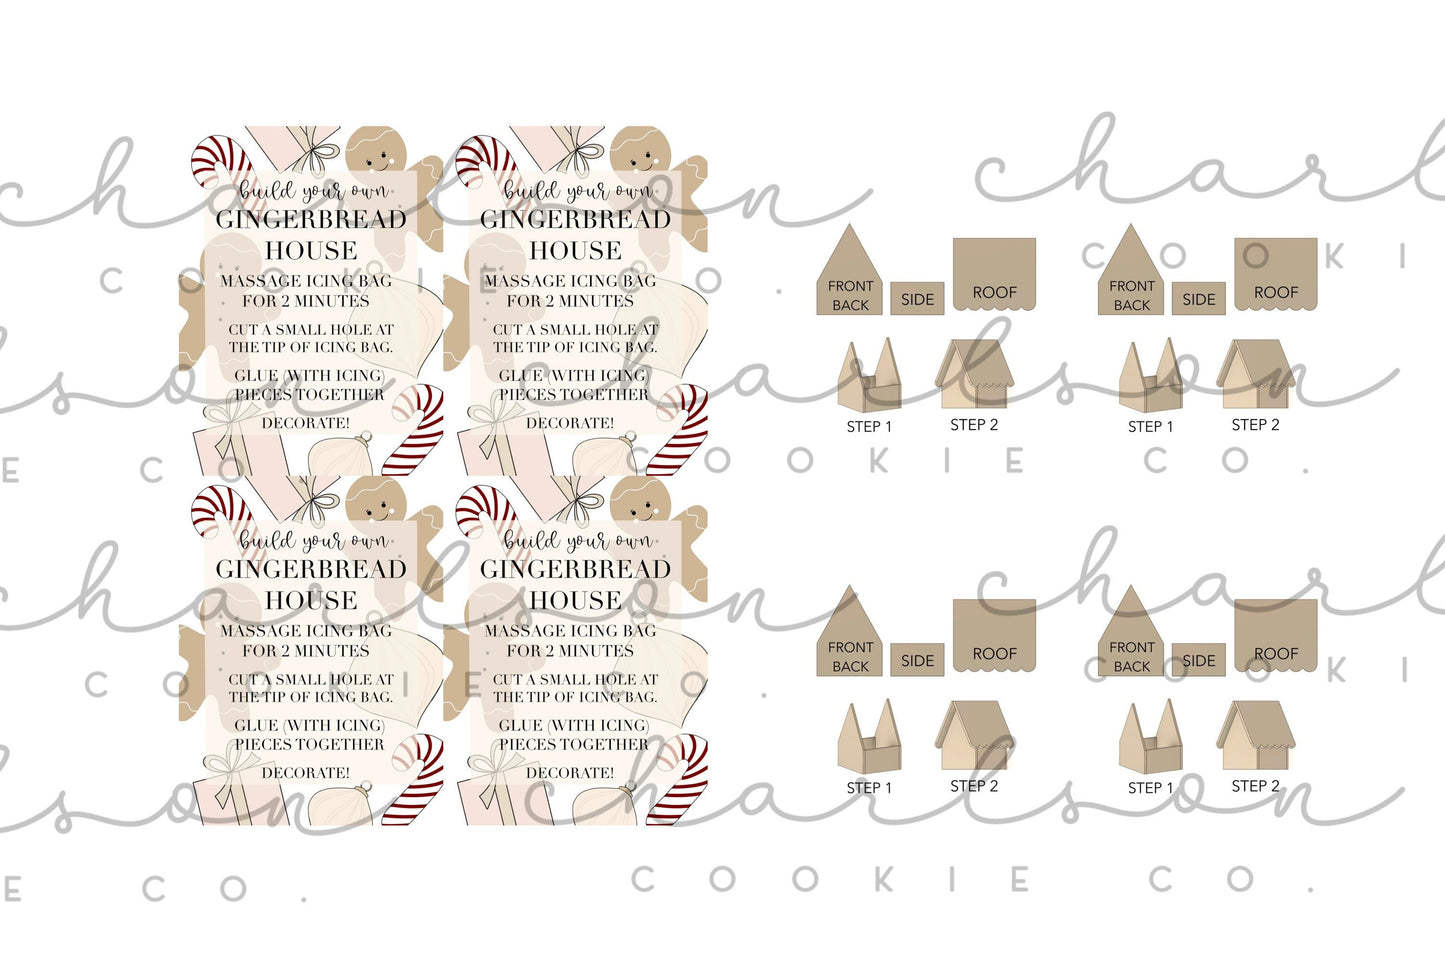 BYO Gingerbread house / Sugar cookie house (gingerbread print) instruction card (3 files) / Instant digital download